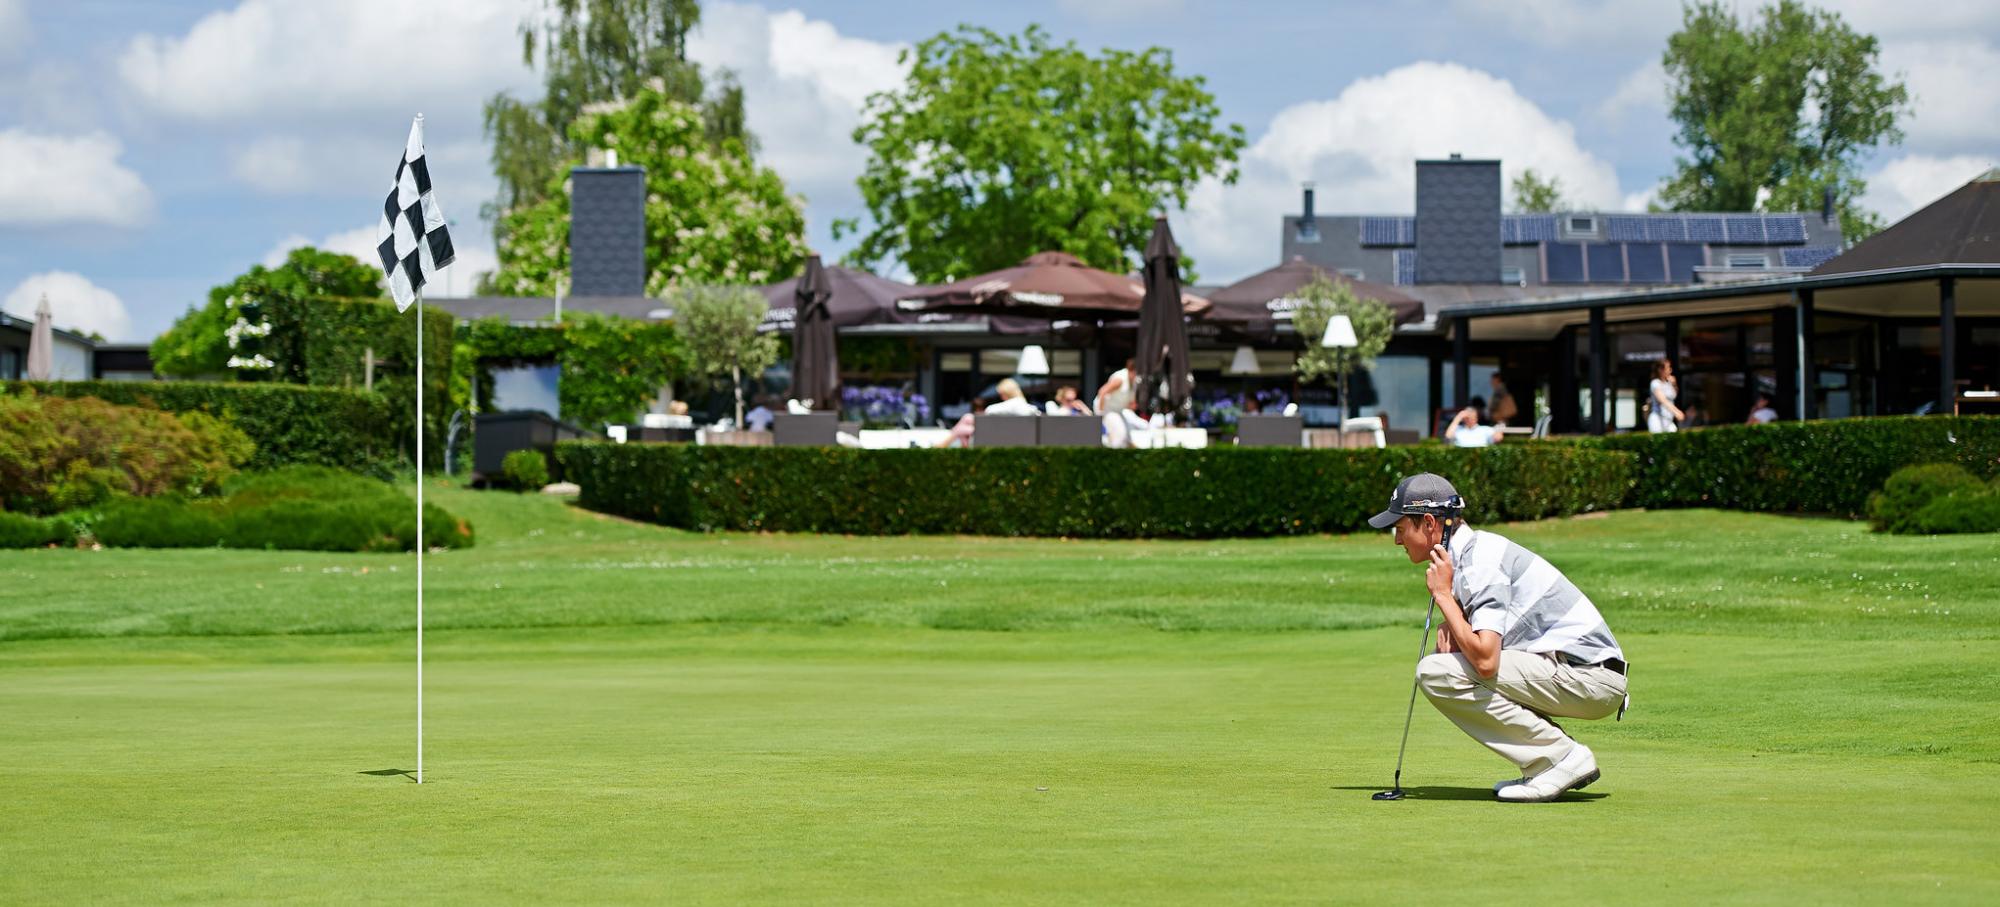 The Golf de Rigenee's beautiful golf course situated in marvelous Brussels Waterloo & Mons.